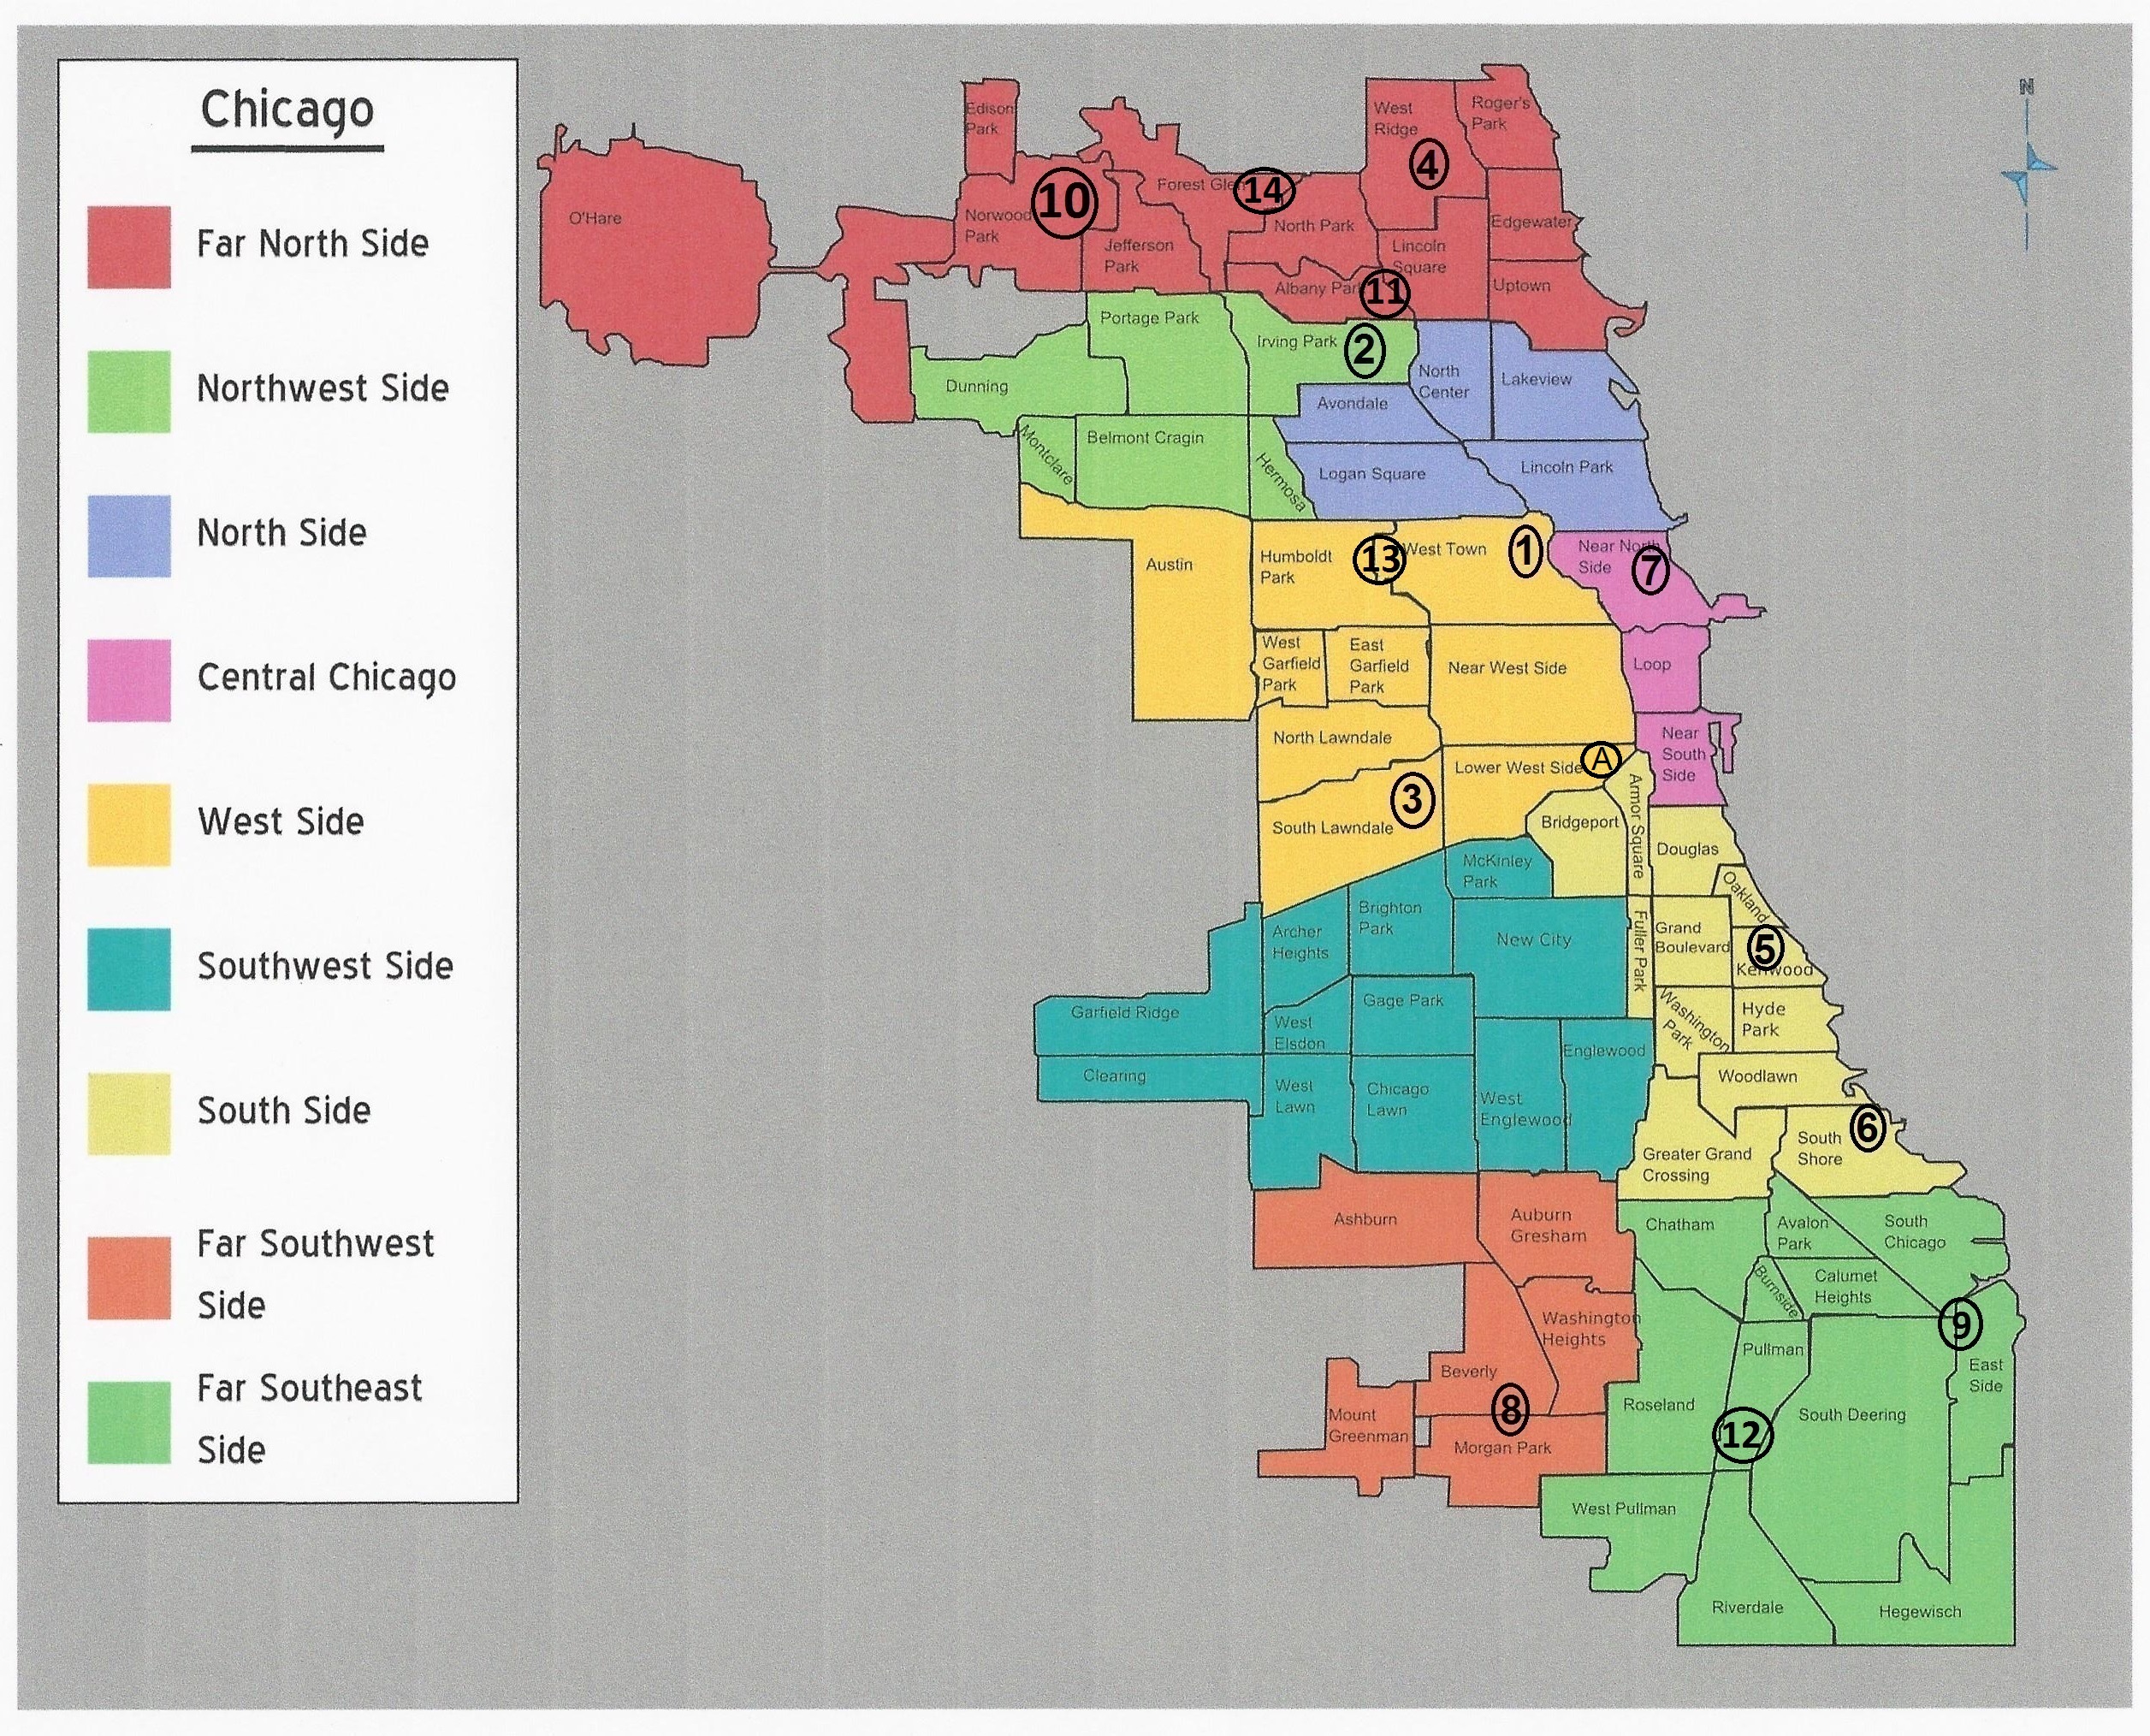 Chicago neighborhoods with high crime rates and therefore should be avoided. (Photo: Chicago Neighborhood Walks)